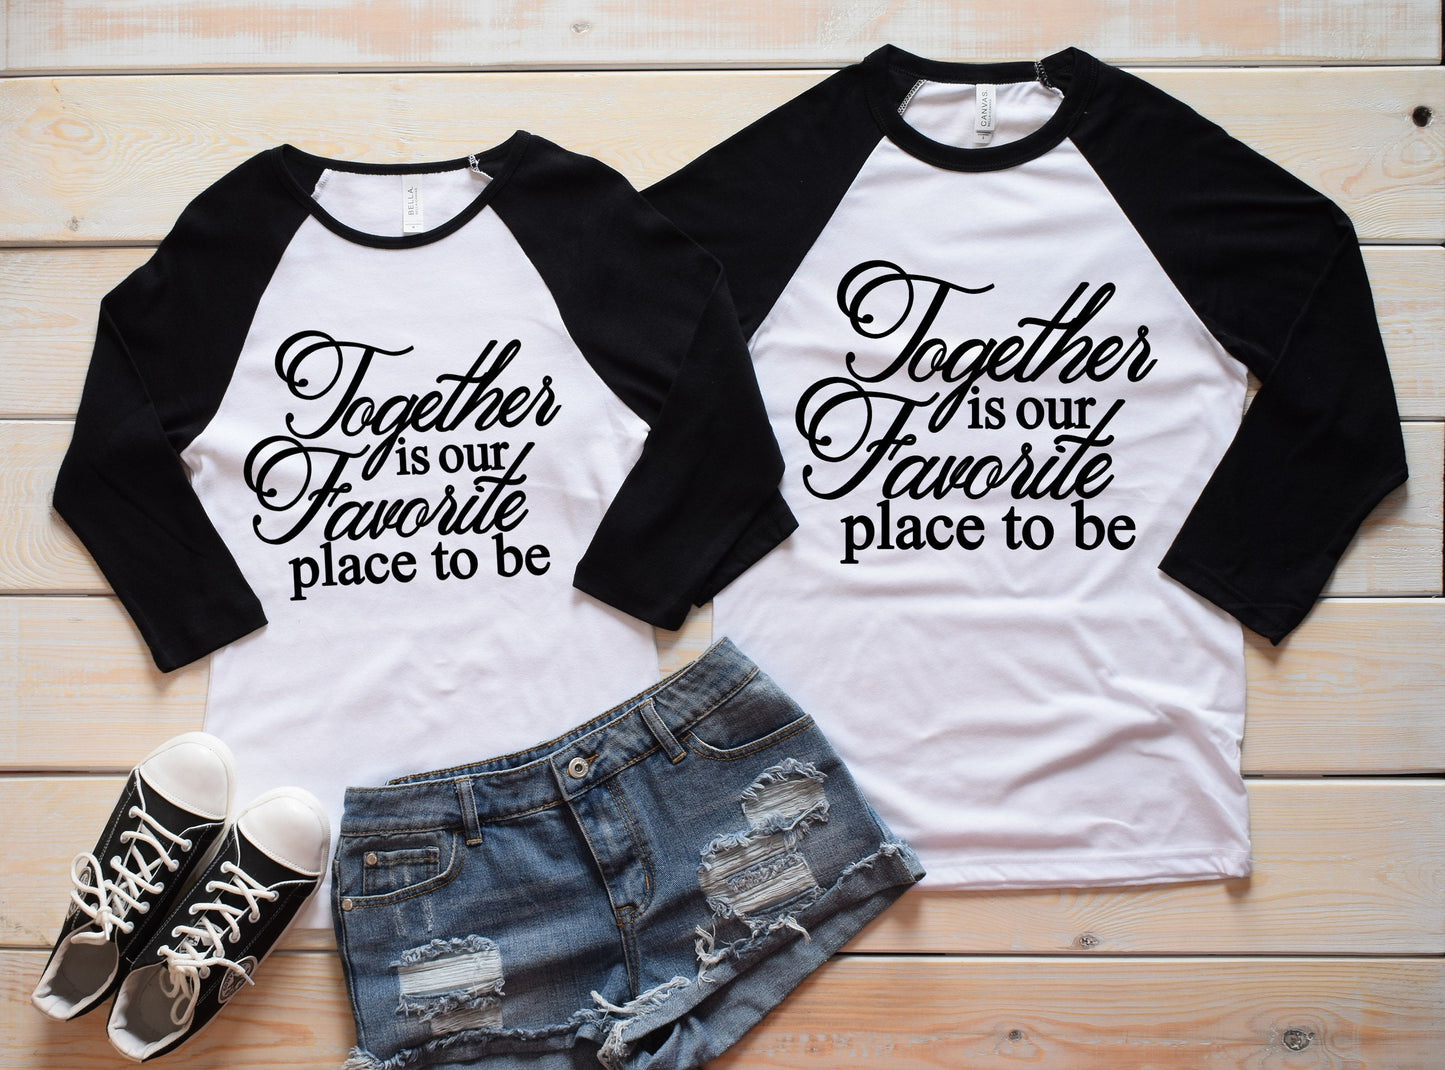 Together Is Our Favorite Place to Be unisex raglan t-shirts - anniversary shirts - matching couple shirts - mr mrs shirts - girlfriend gift